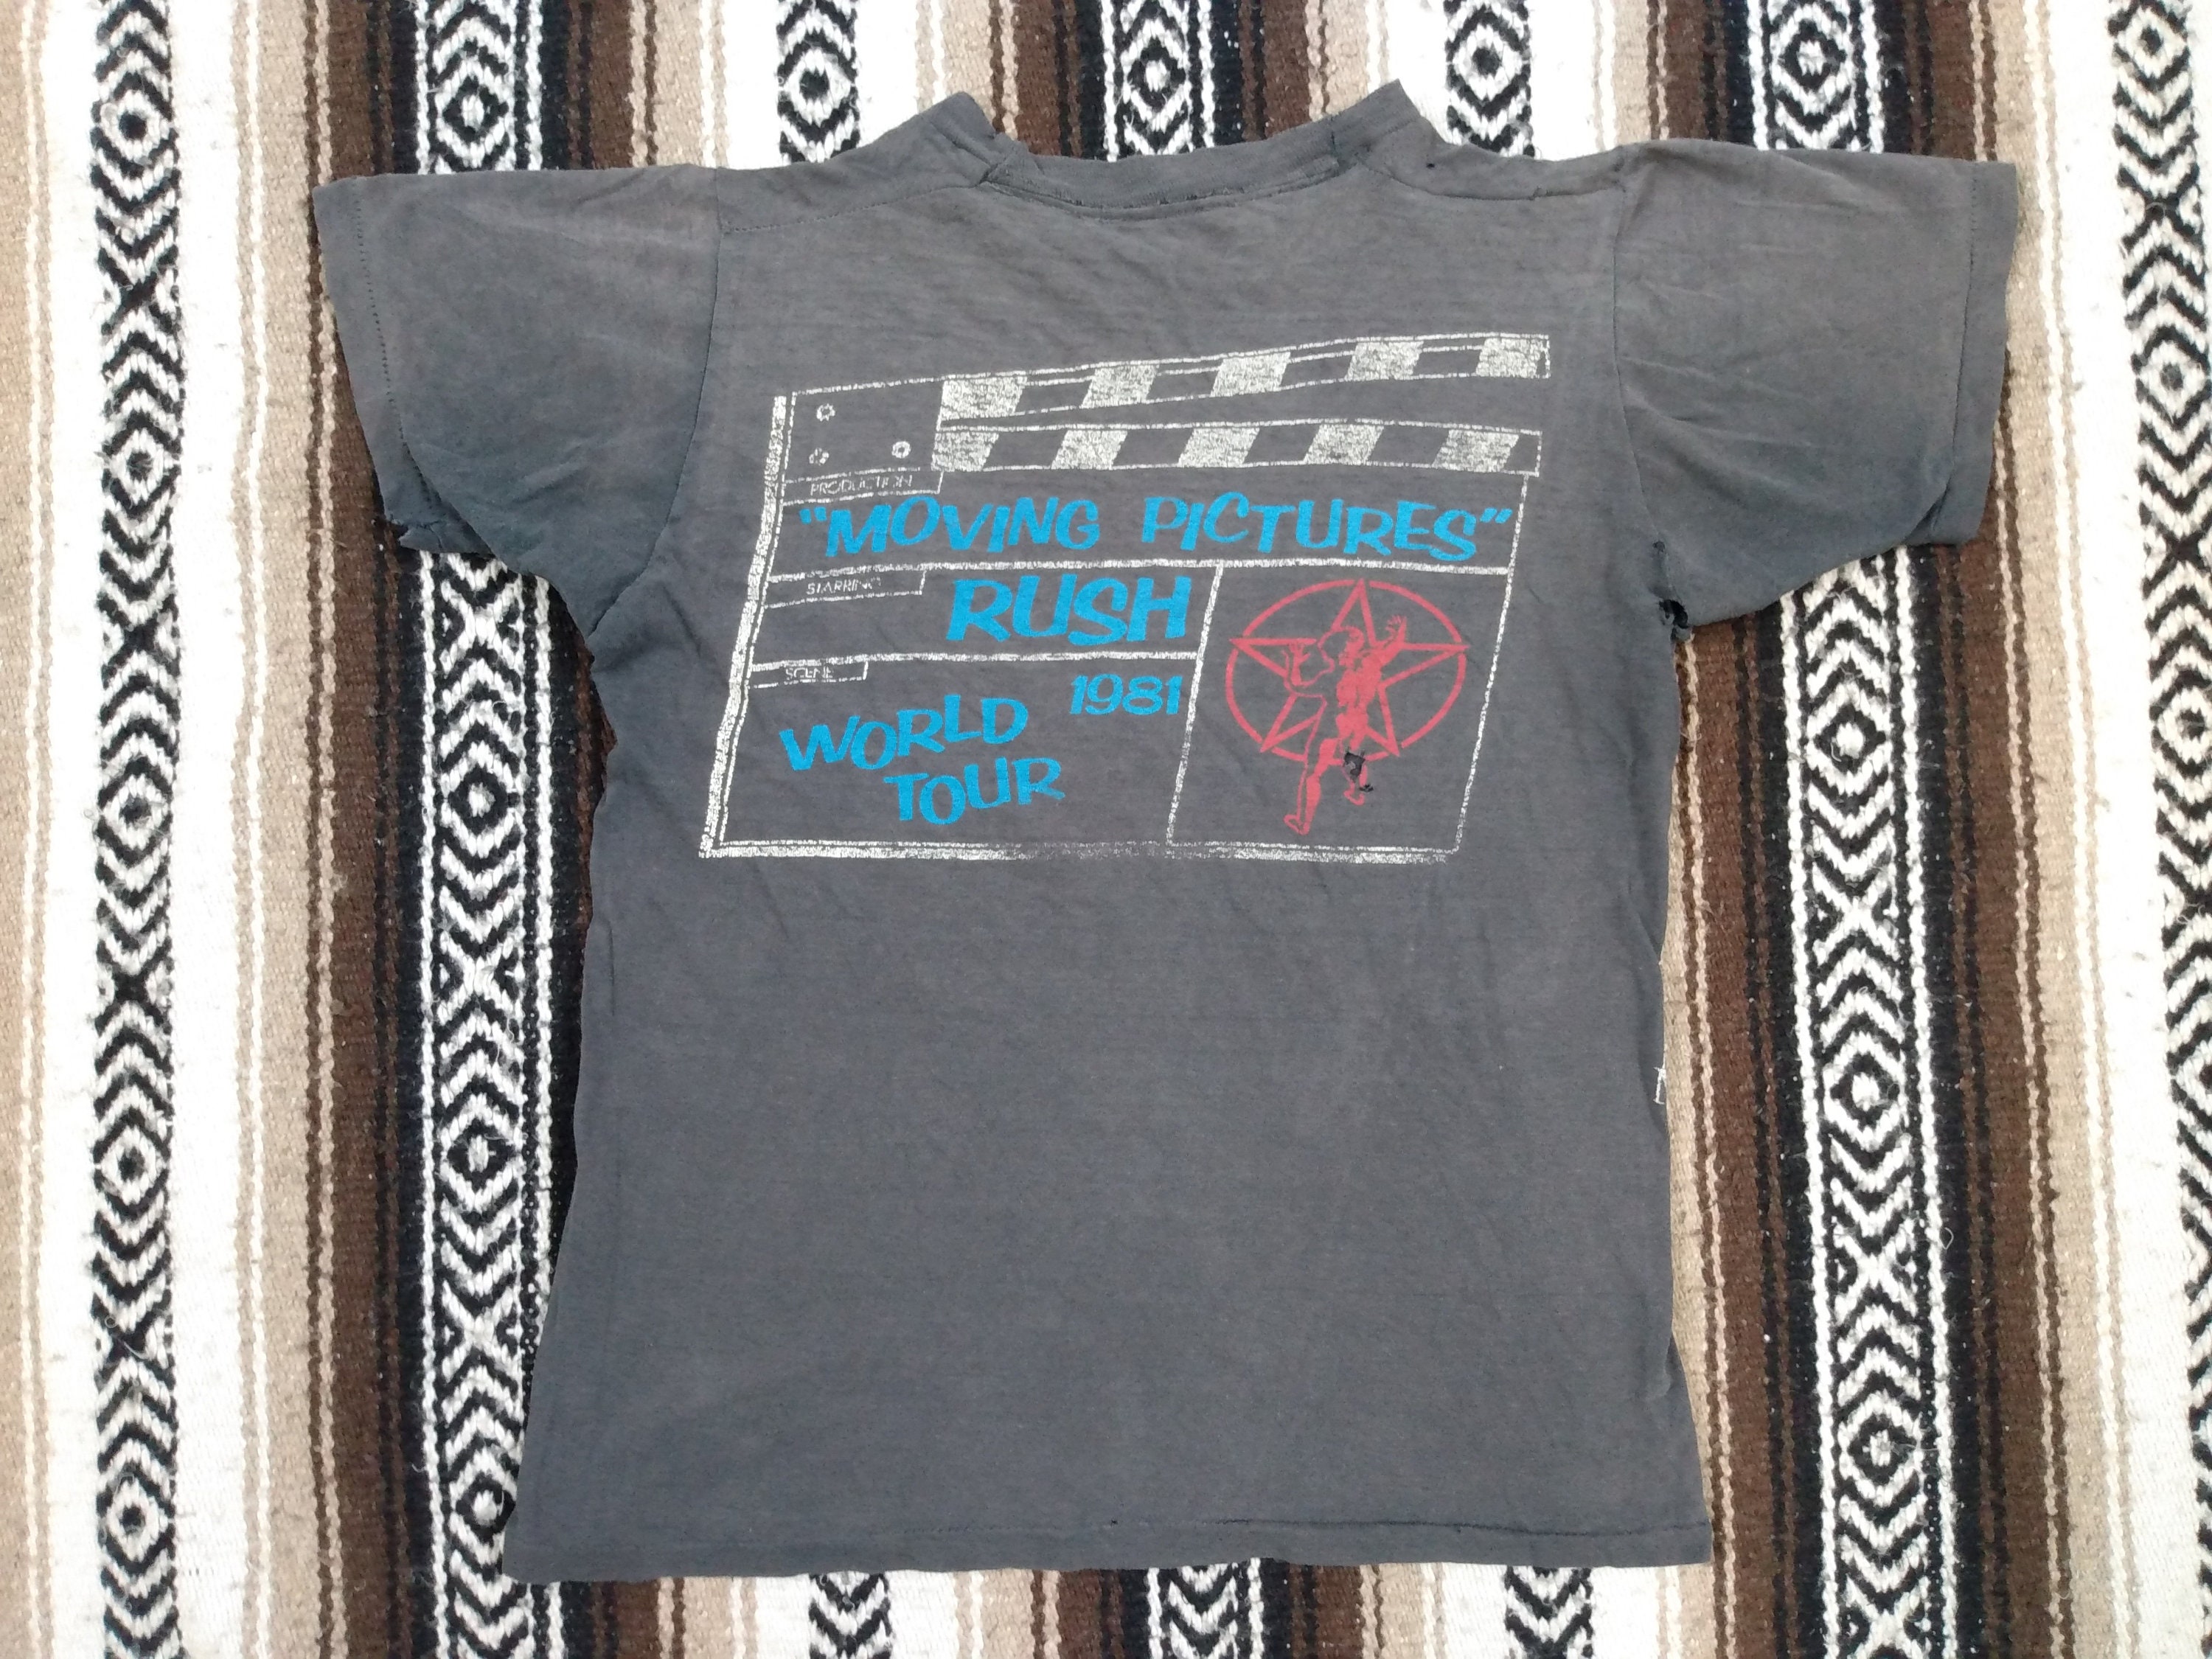 Tour Faded Size Moving Vintage - Thin Etsy All and Prog Band Shirt Stitch Single Concert Rock S/M RUSH Worn T Soft Cotton 1981 Pictures Sun 80s Tee